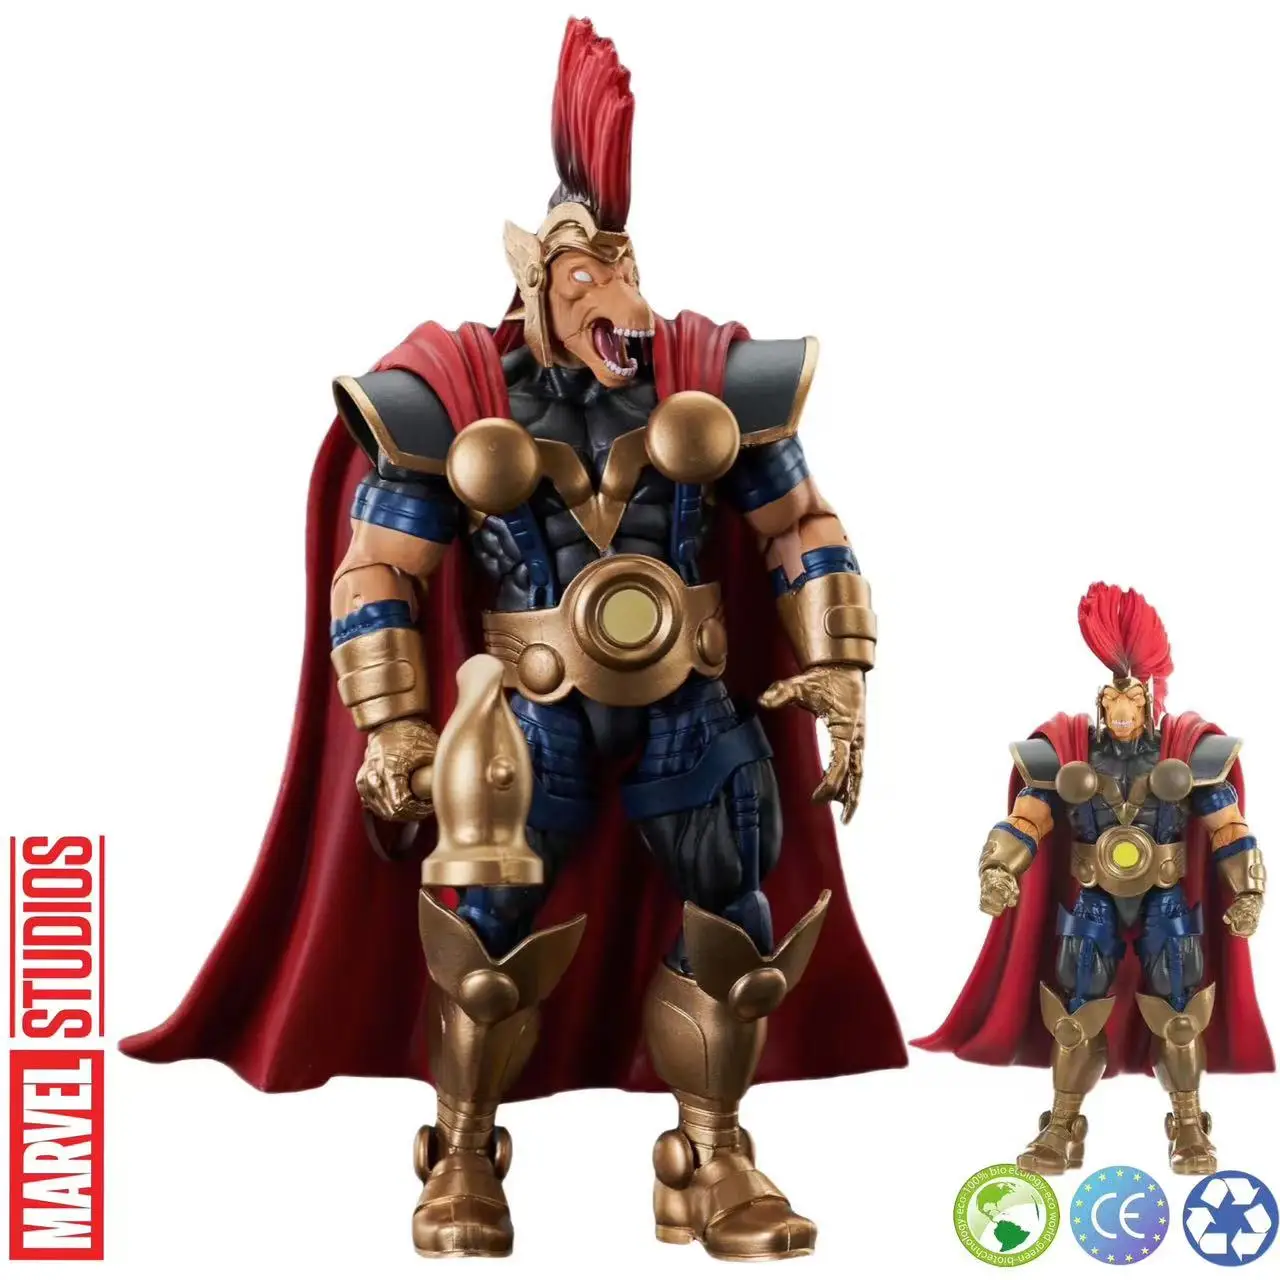 

7 Inches Hasbro Marvel Legends Dst Marvel Select Beta Ray Bill Anime Action Figure Model Toys Desktop Decoration Kid Toy